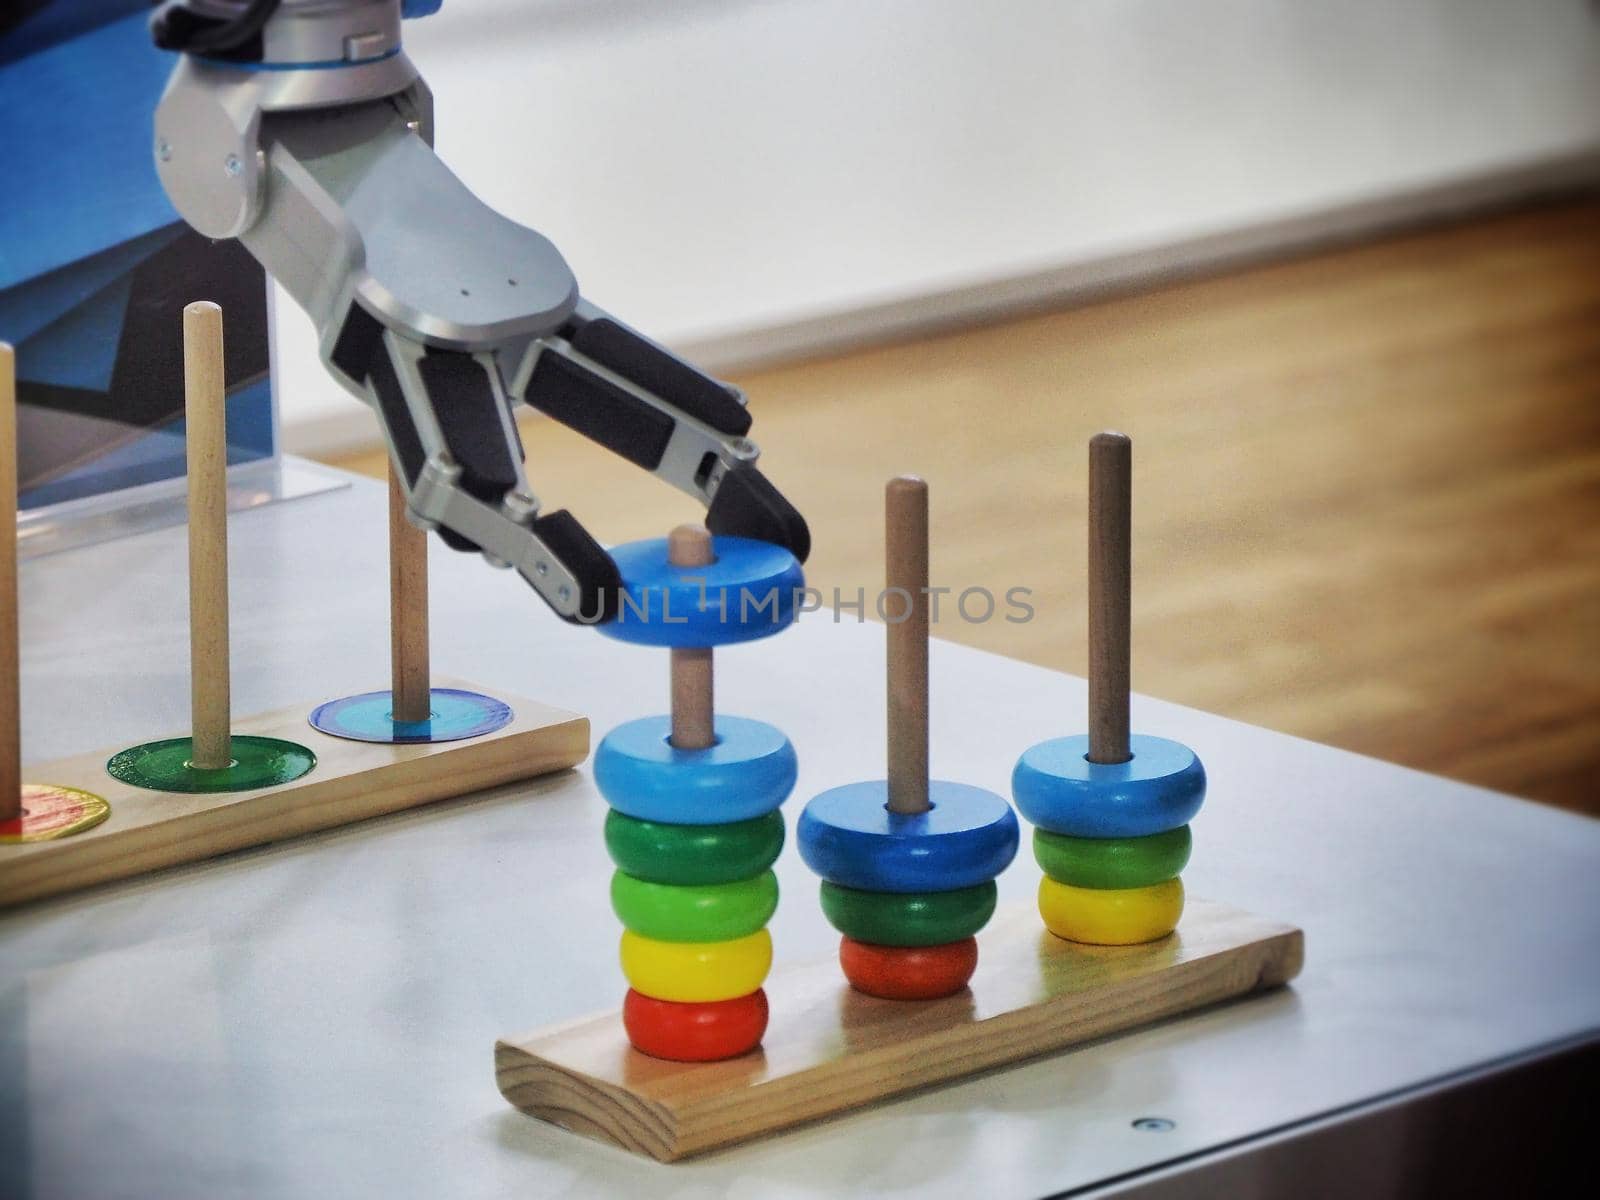 Robotic hand moving an object representing artificial intelligence in industrial environment